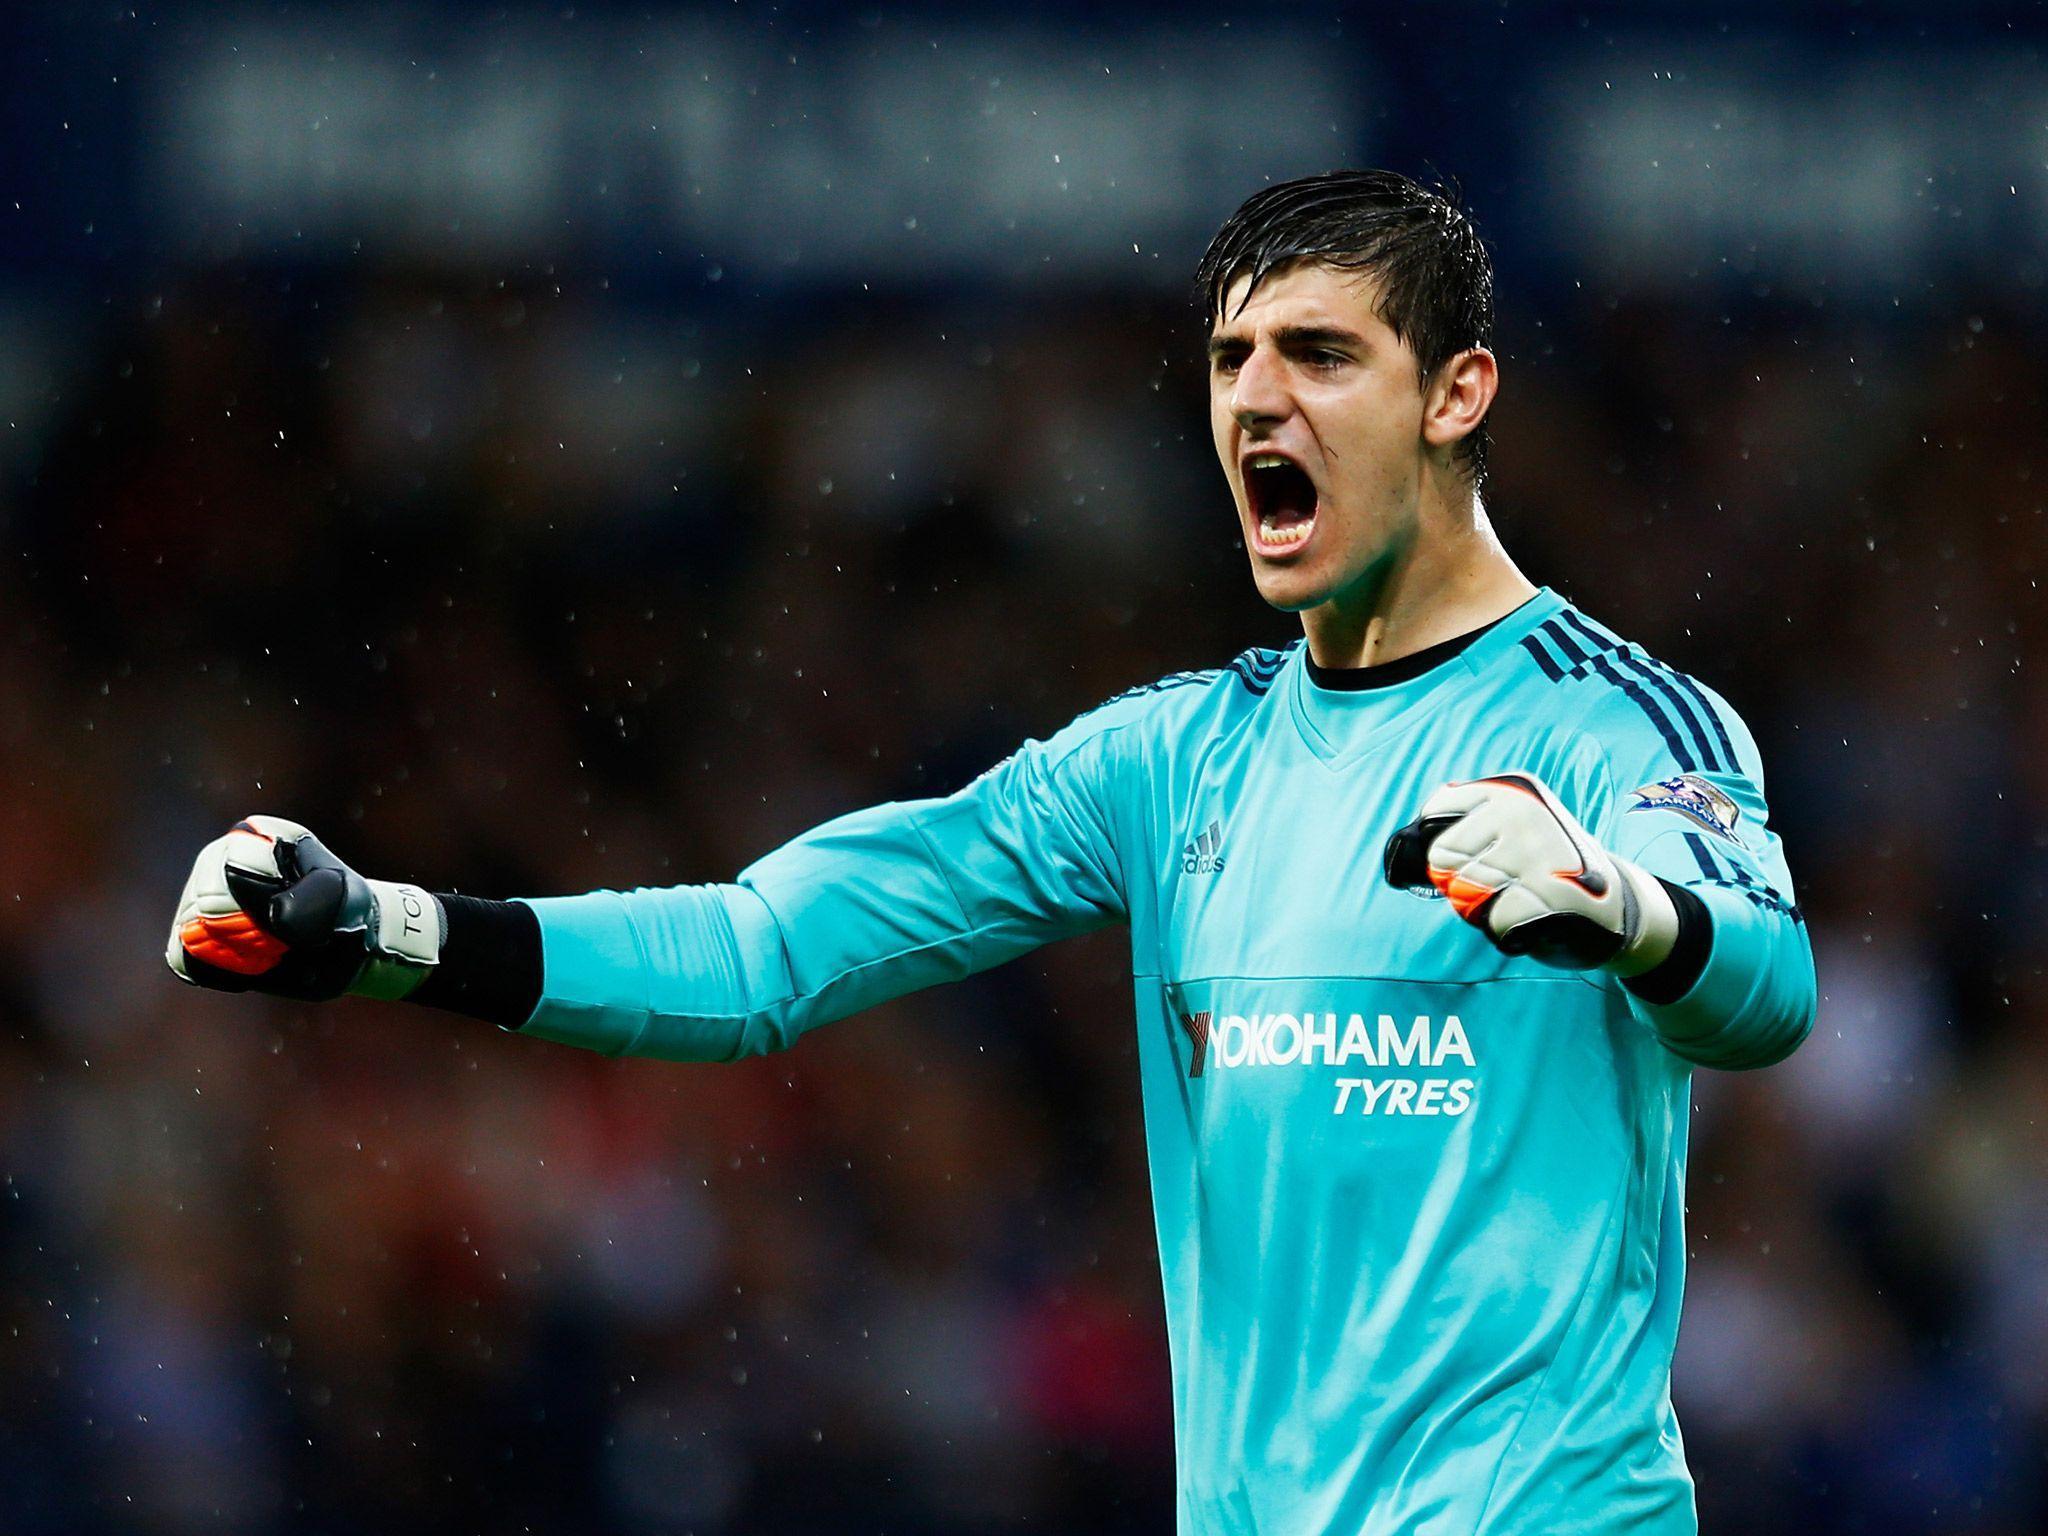 Thibaut Courtois injury news: Chelsea goalkeeper confirms he is